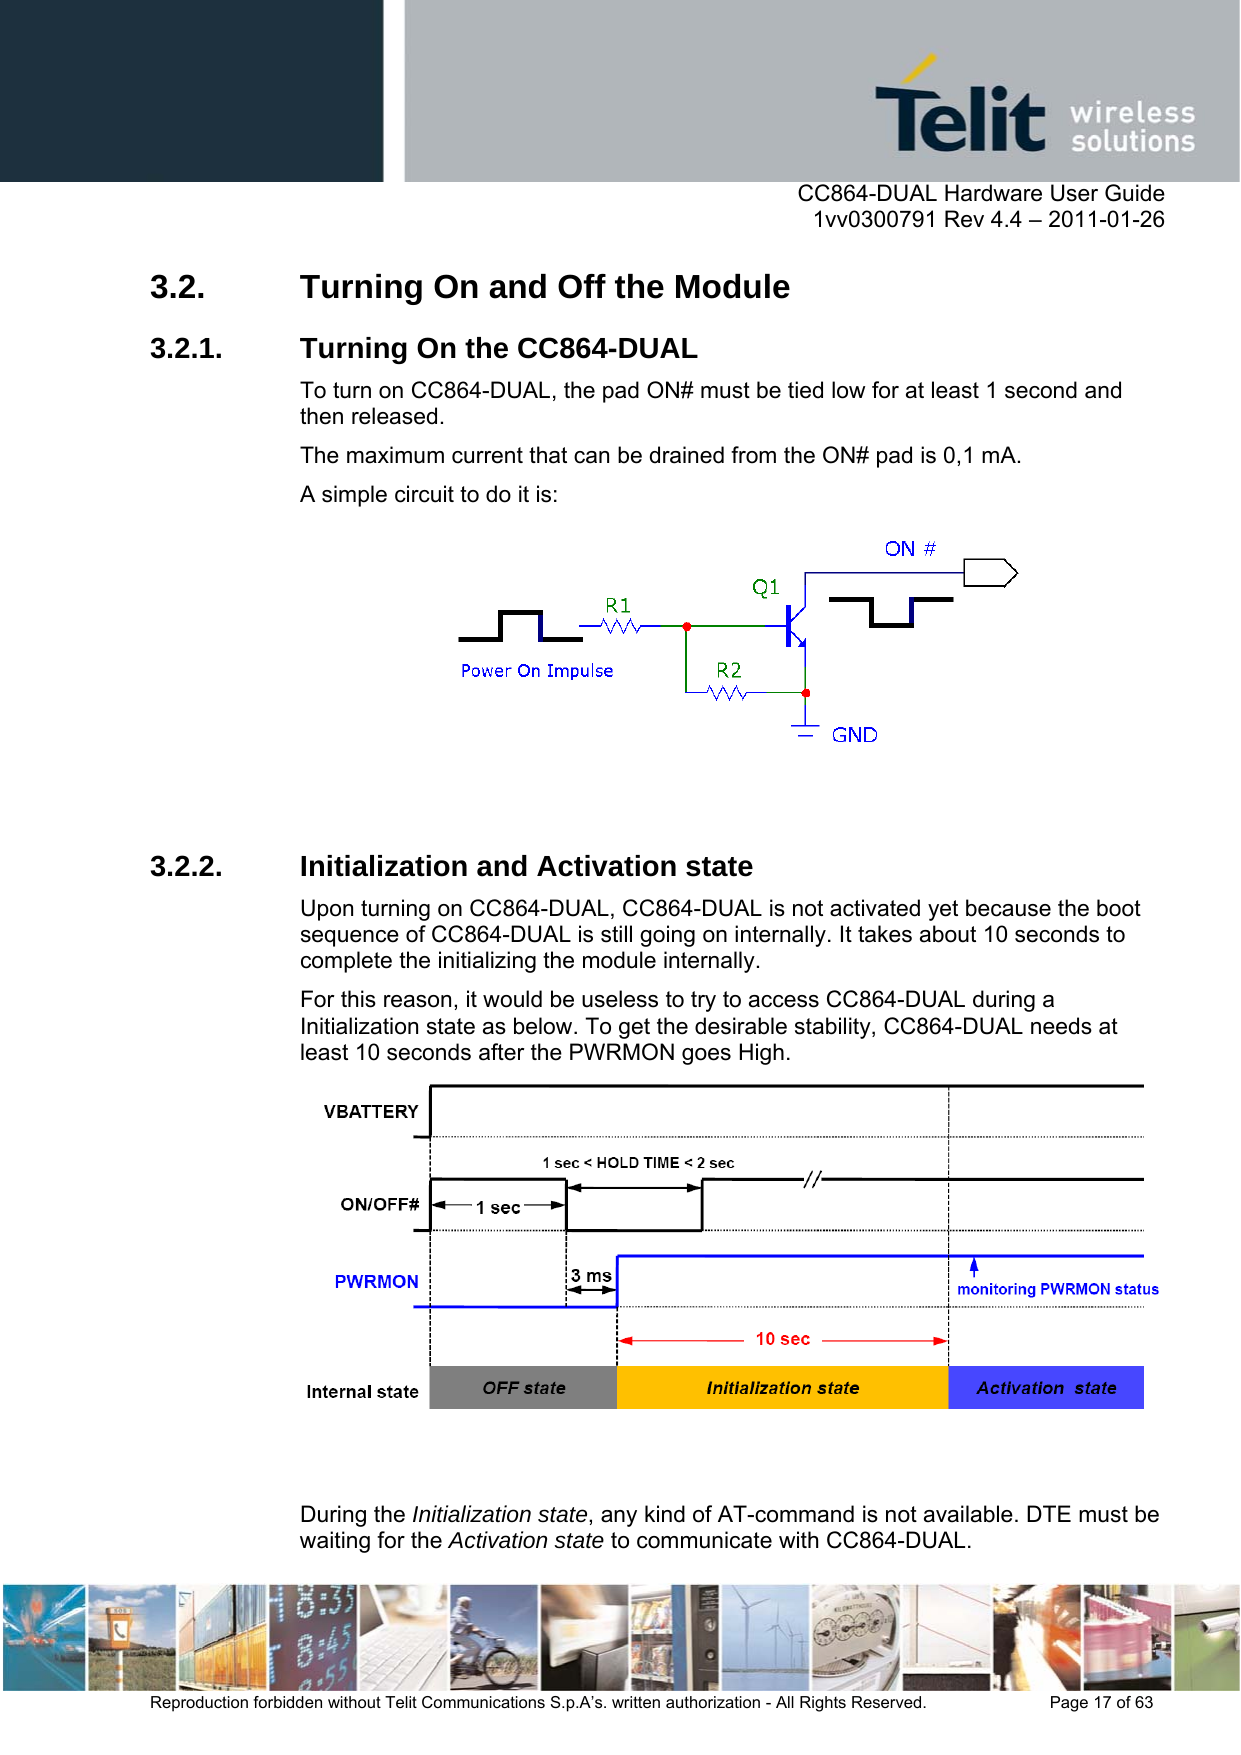      CC864-DUAL Hardware User Guide    1vv0300791 Rev 4.4 – 2011-01-26  Reproduction forbidden without Telit Communications S.p.A’s. written authorization - All Rights Reserved.    Page 17 of 63  3.2.  Turning On and Off the Module 3.2.1.  Turning On the CC864-DUAL To turn on CC864-DUAL, the pad ON# must be tied low for at least 1 second and then released. The maximum current that can be drained from the ON# pad is 0,1 mA. A simple circuit to do it is:    3.2.2.  Initialization and Activation state Upon turning on CC864-DUAL, CC864-DUAL is not activated yet because the boot sequence of CC864-DUAL is still going on internally. It takes about 10 seconds to complete the initializing the module internally. For this reason, it would be useless to try to access CC864-DUAL during a Initialization state as below. To get the desirable stability, CC864-DUAL needs at least 10 seconds after the PWRMON goes High.    During the Initialization state, any kind of AT-command is not available. DTE must be waiting for the Activation state to communicate with CC864-DUAL. 